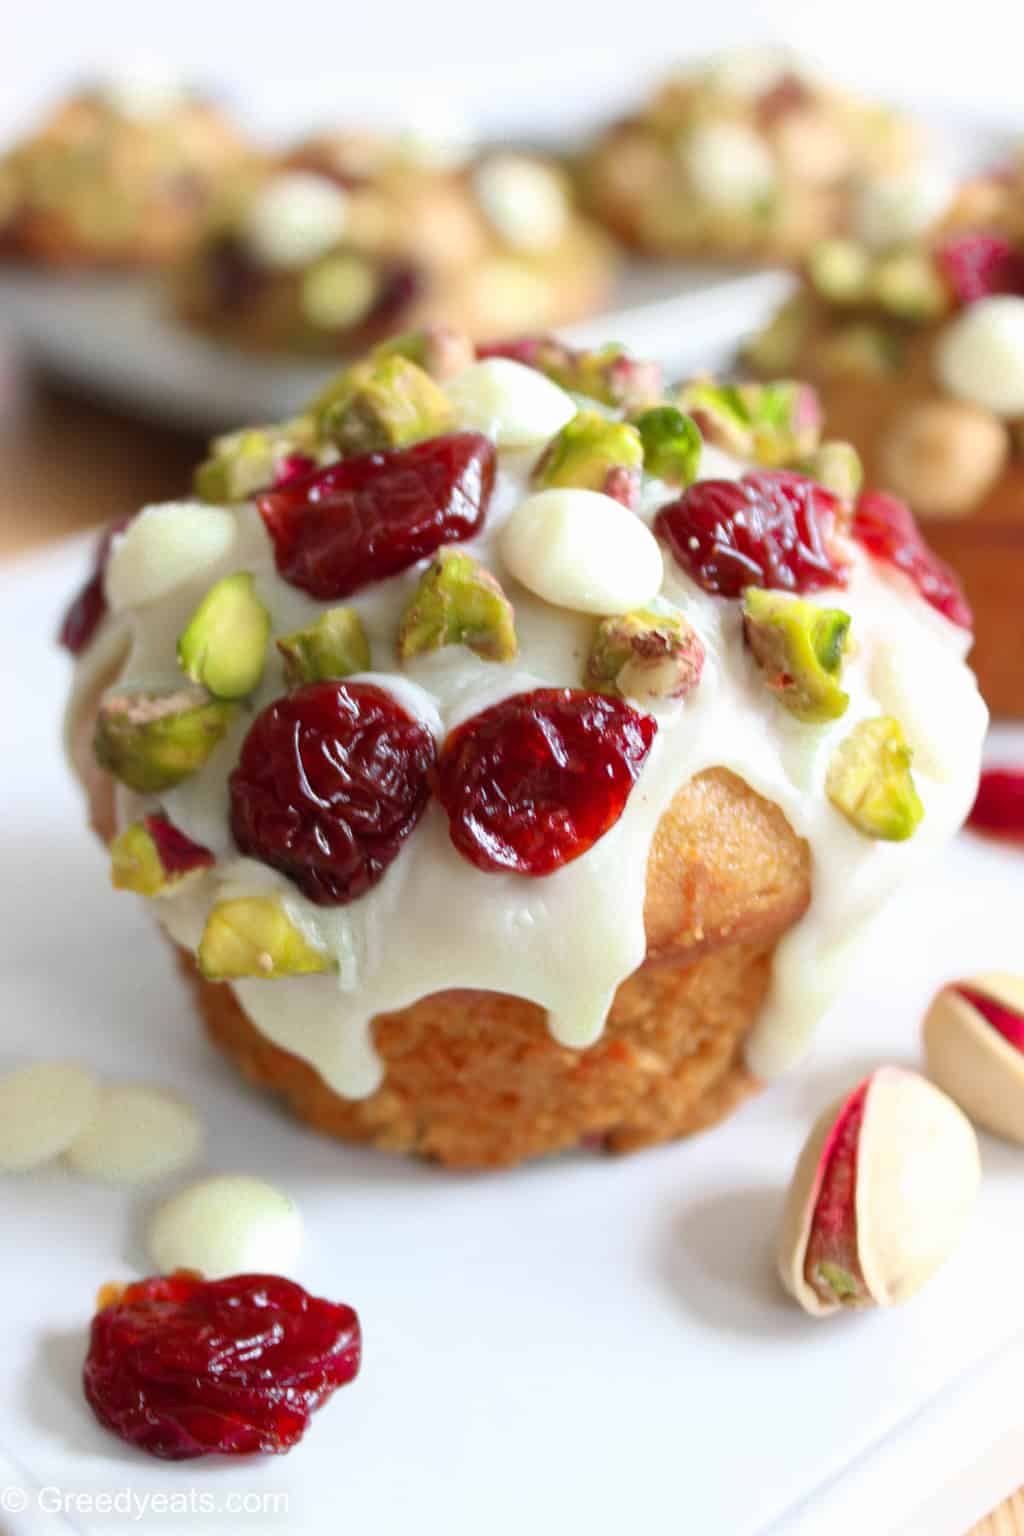 My Cranberry Orange Muffin Recipe bakes super tall and is drizzled with white chocolate.